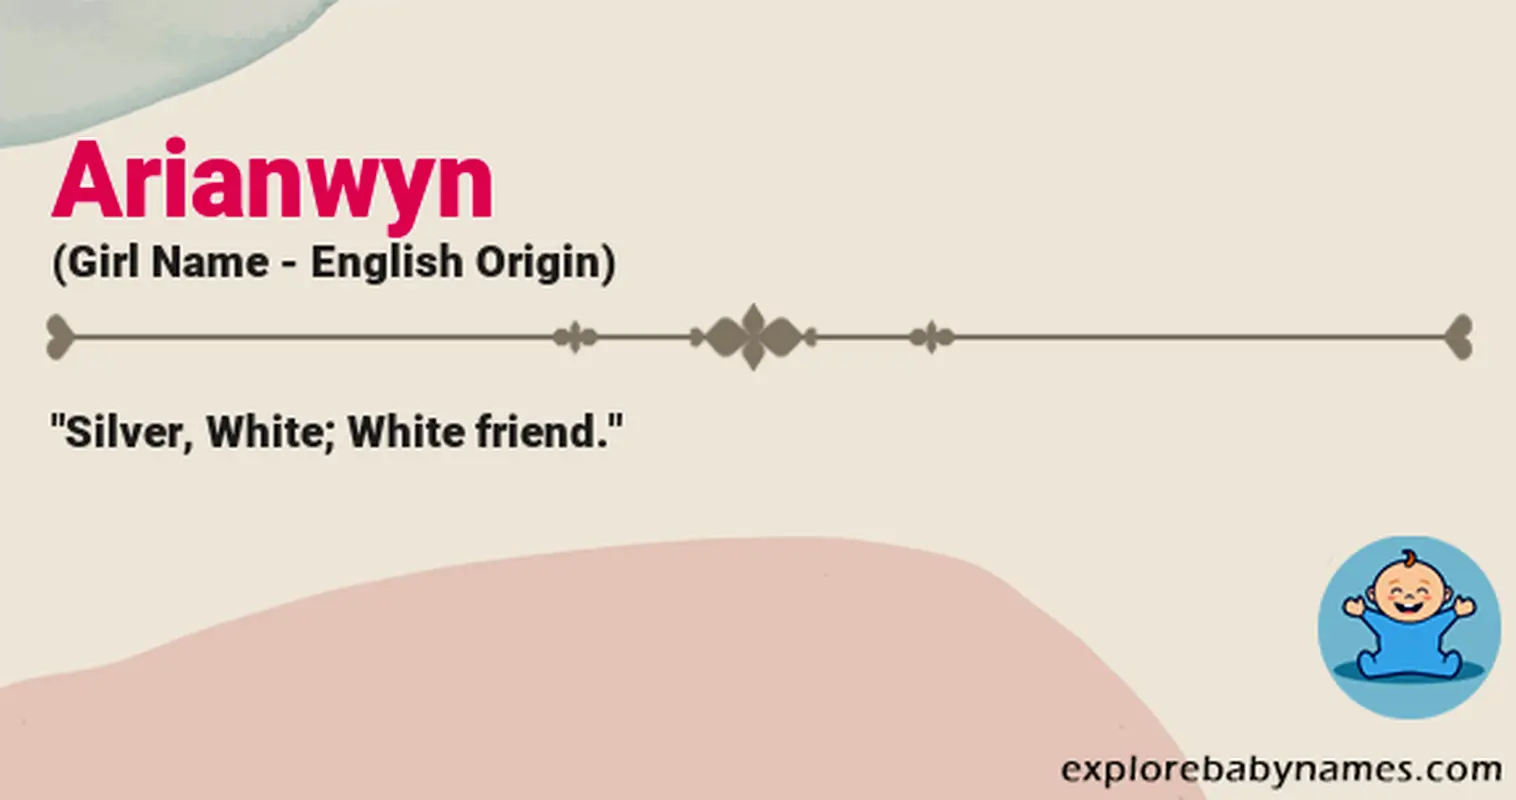 Meaning of Arianwyn